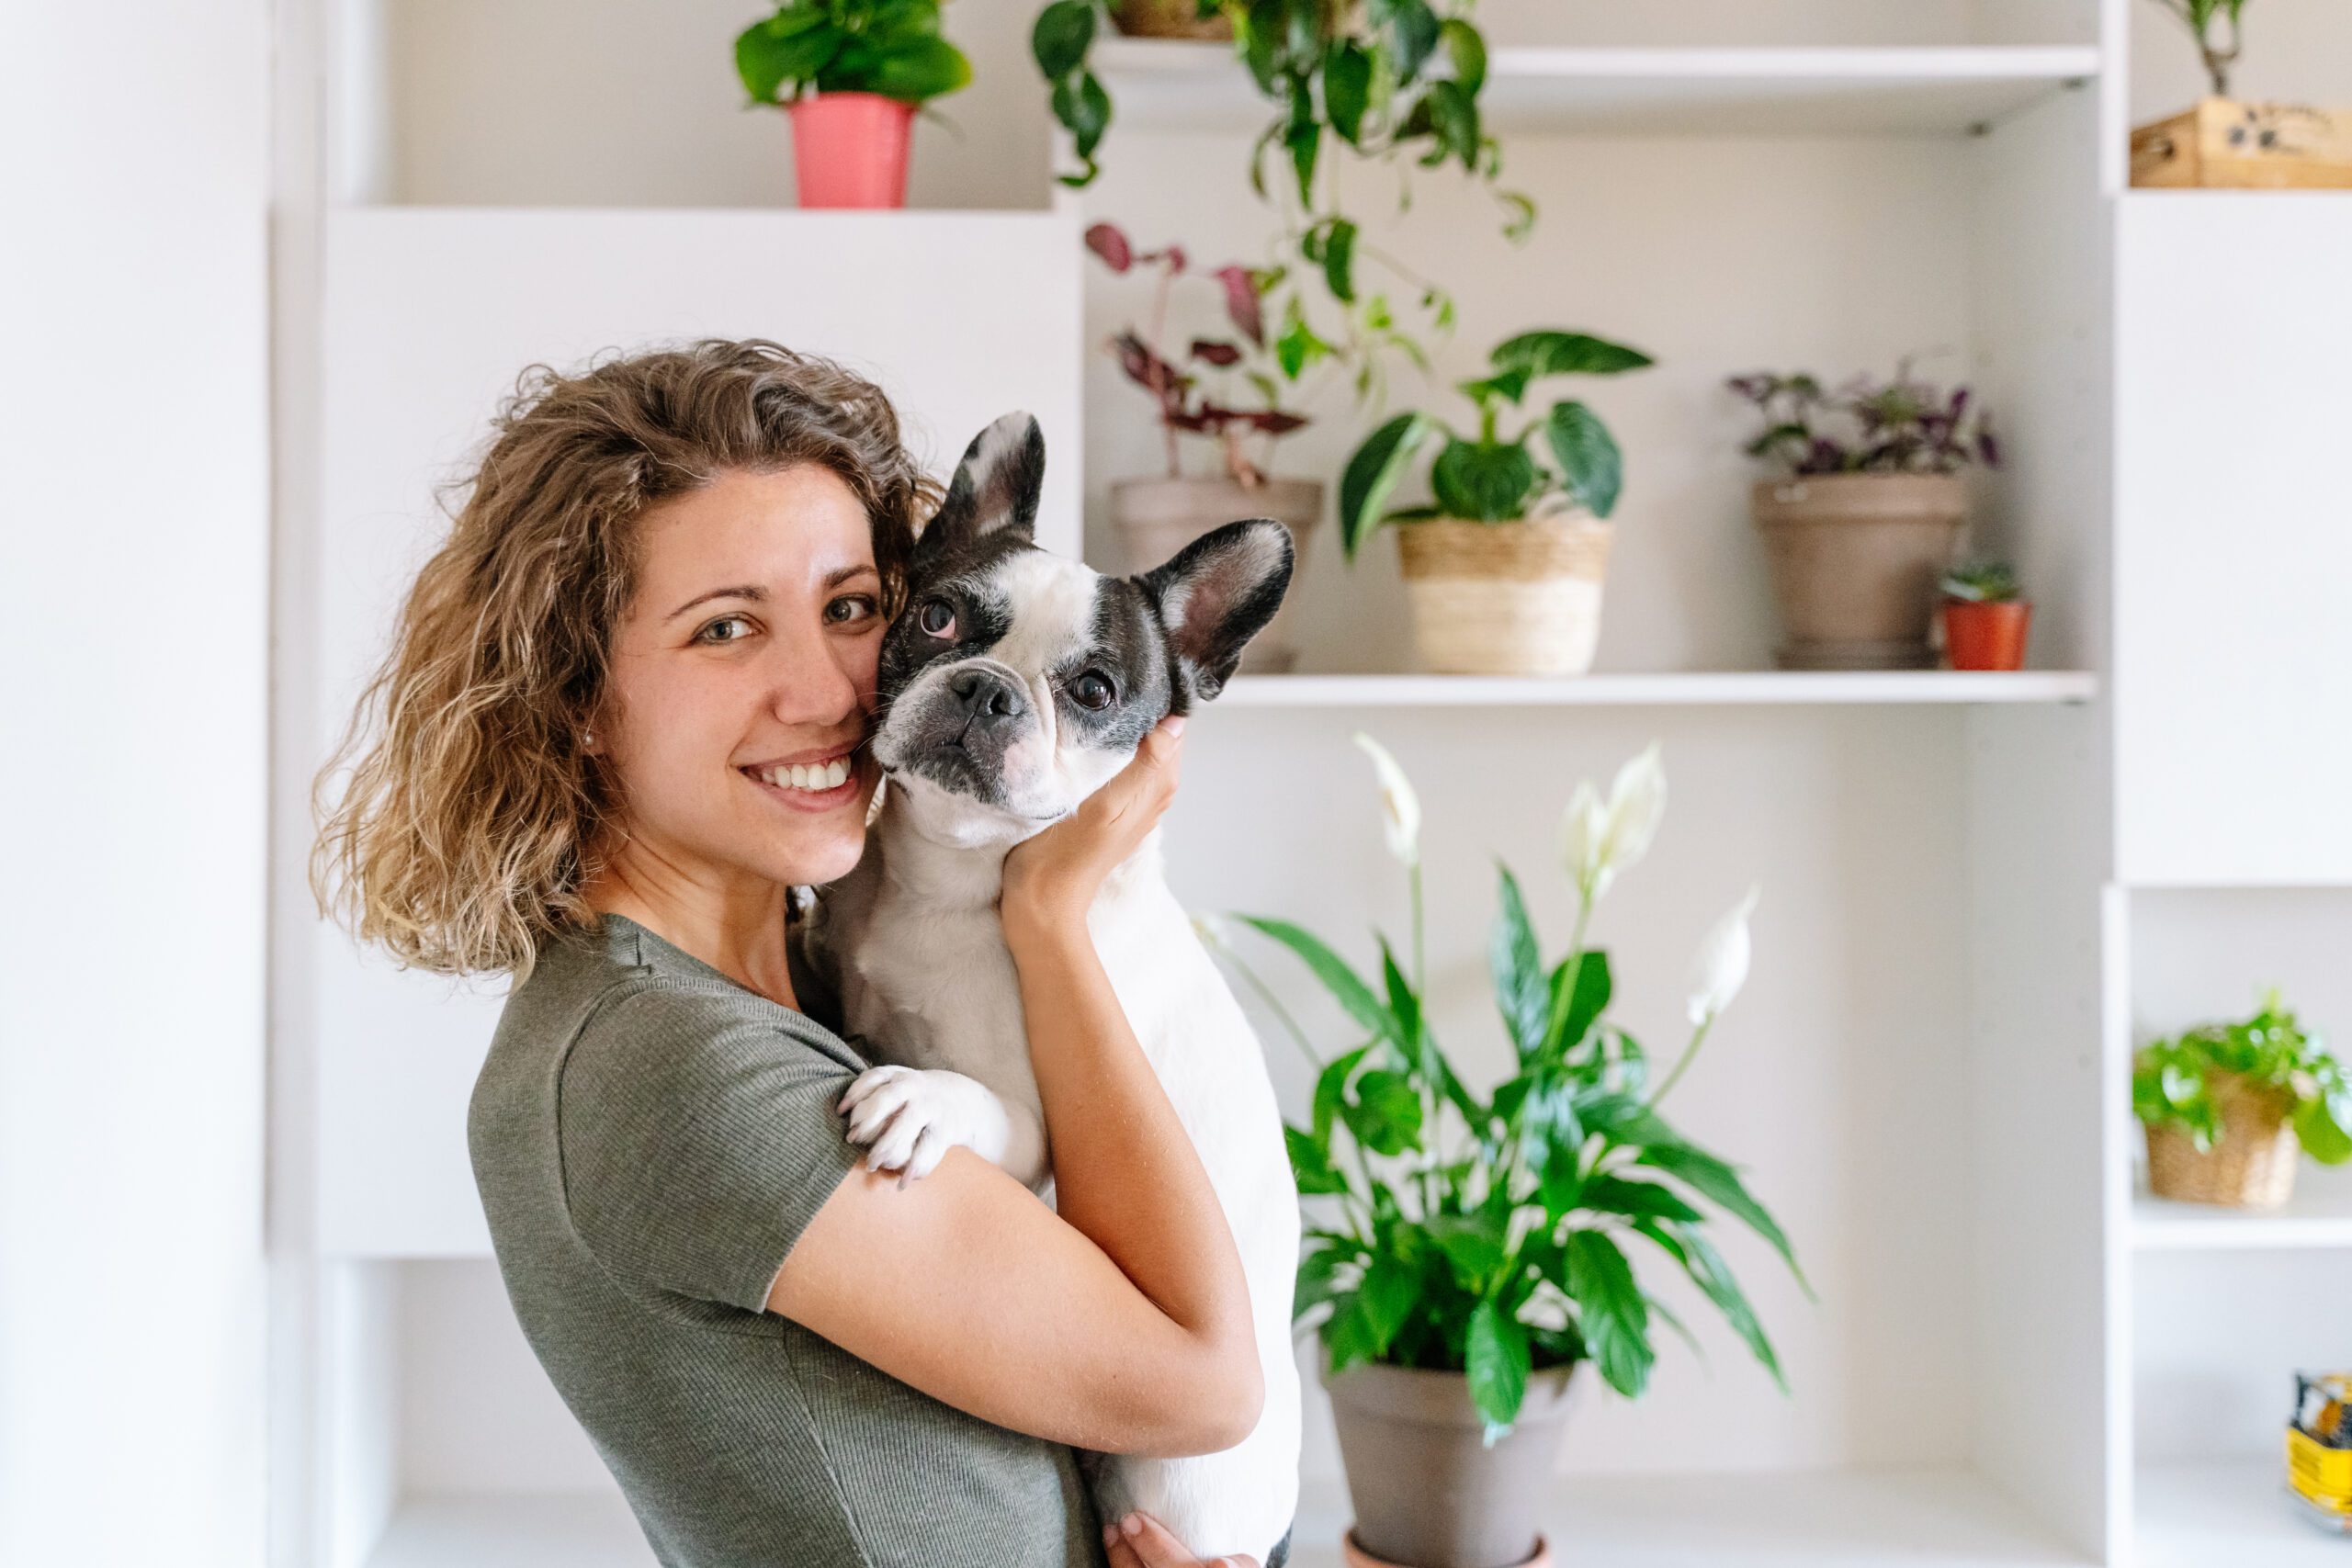 Pet Can Boost Your Mental Health, Pet Ownership